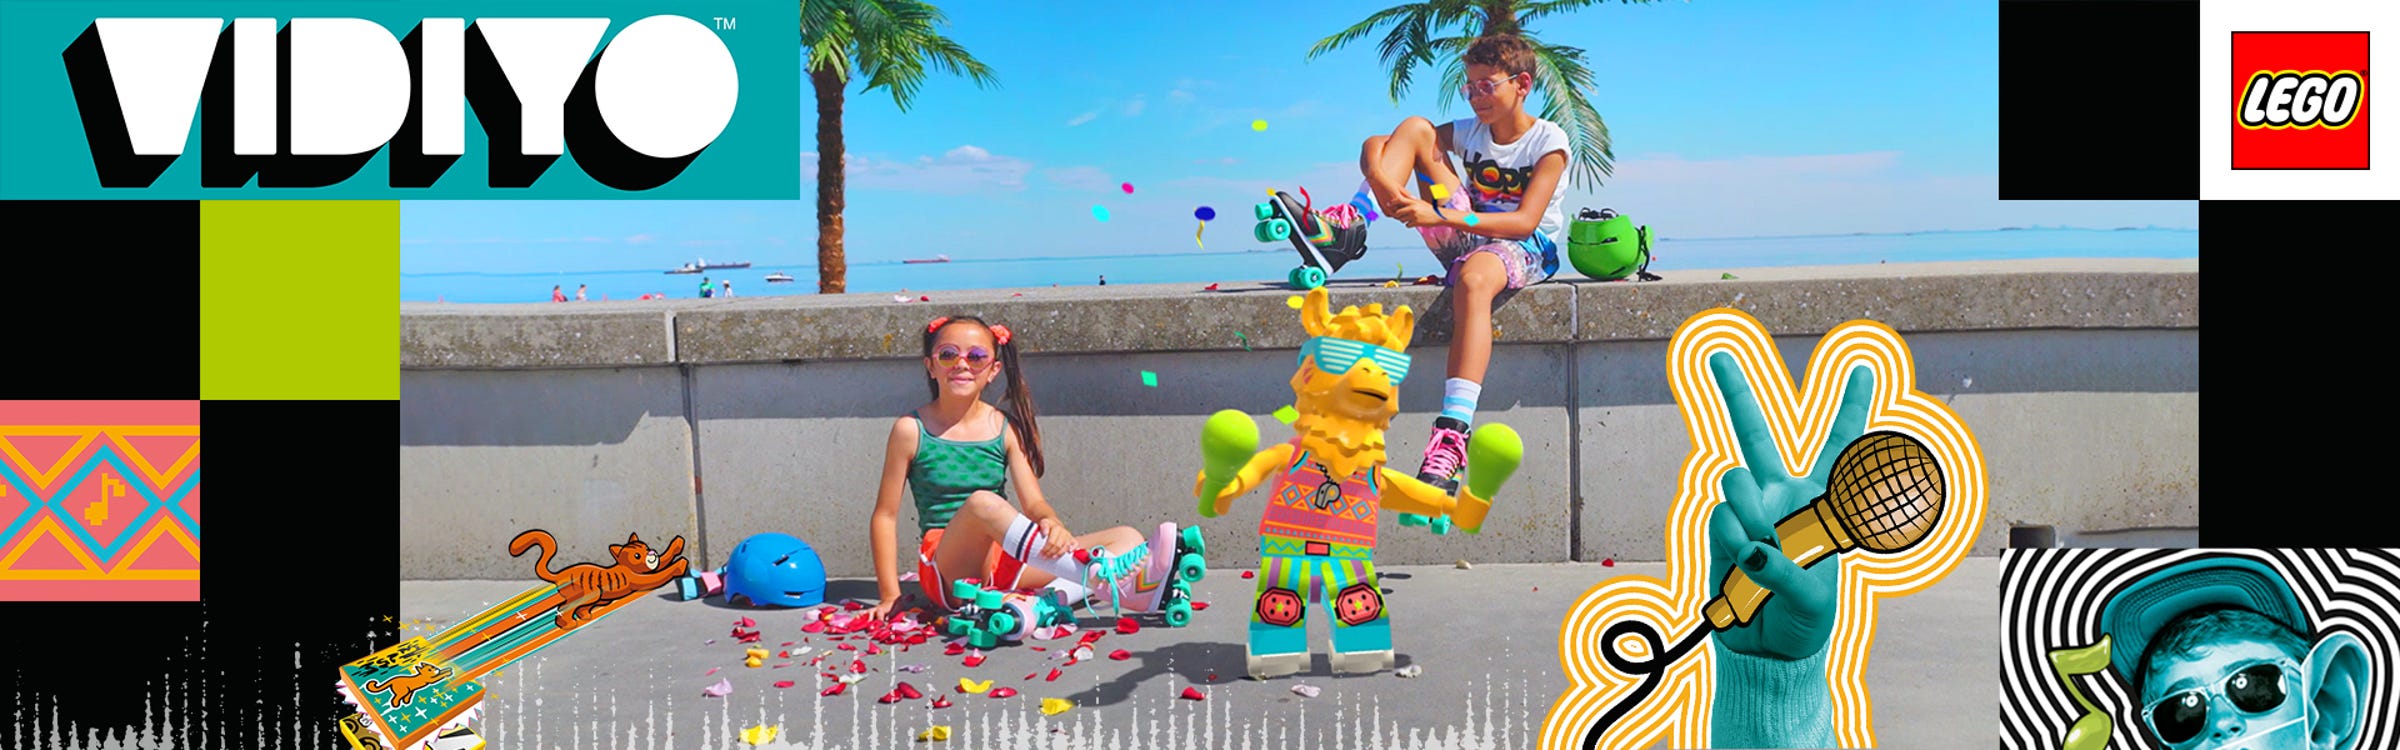 LEGO VIDIYO is a new AR music video maker for kids